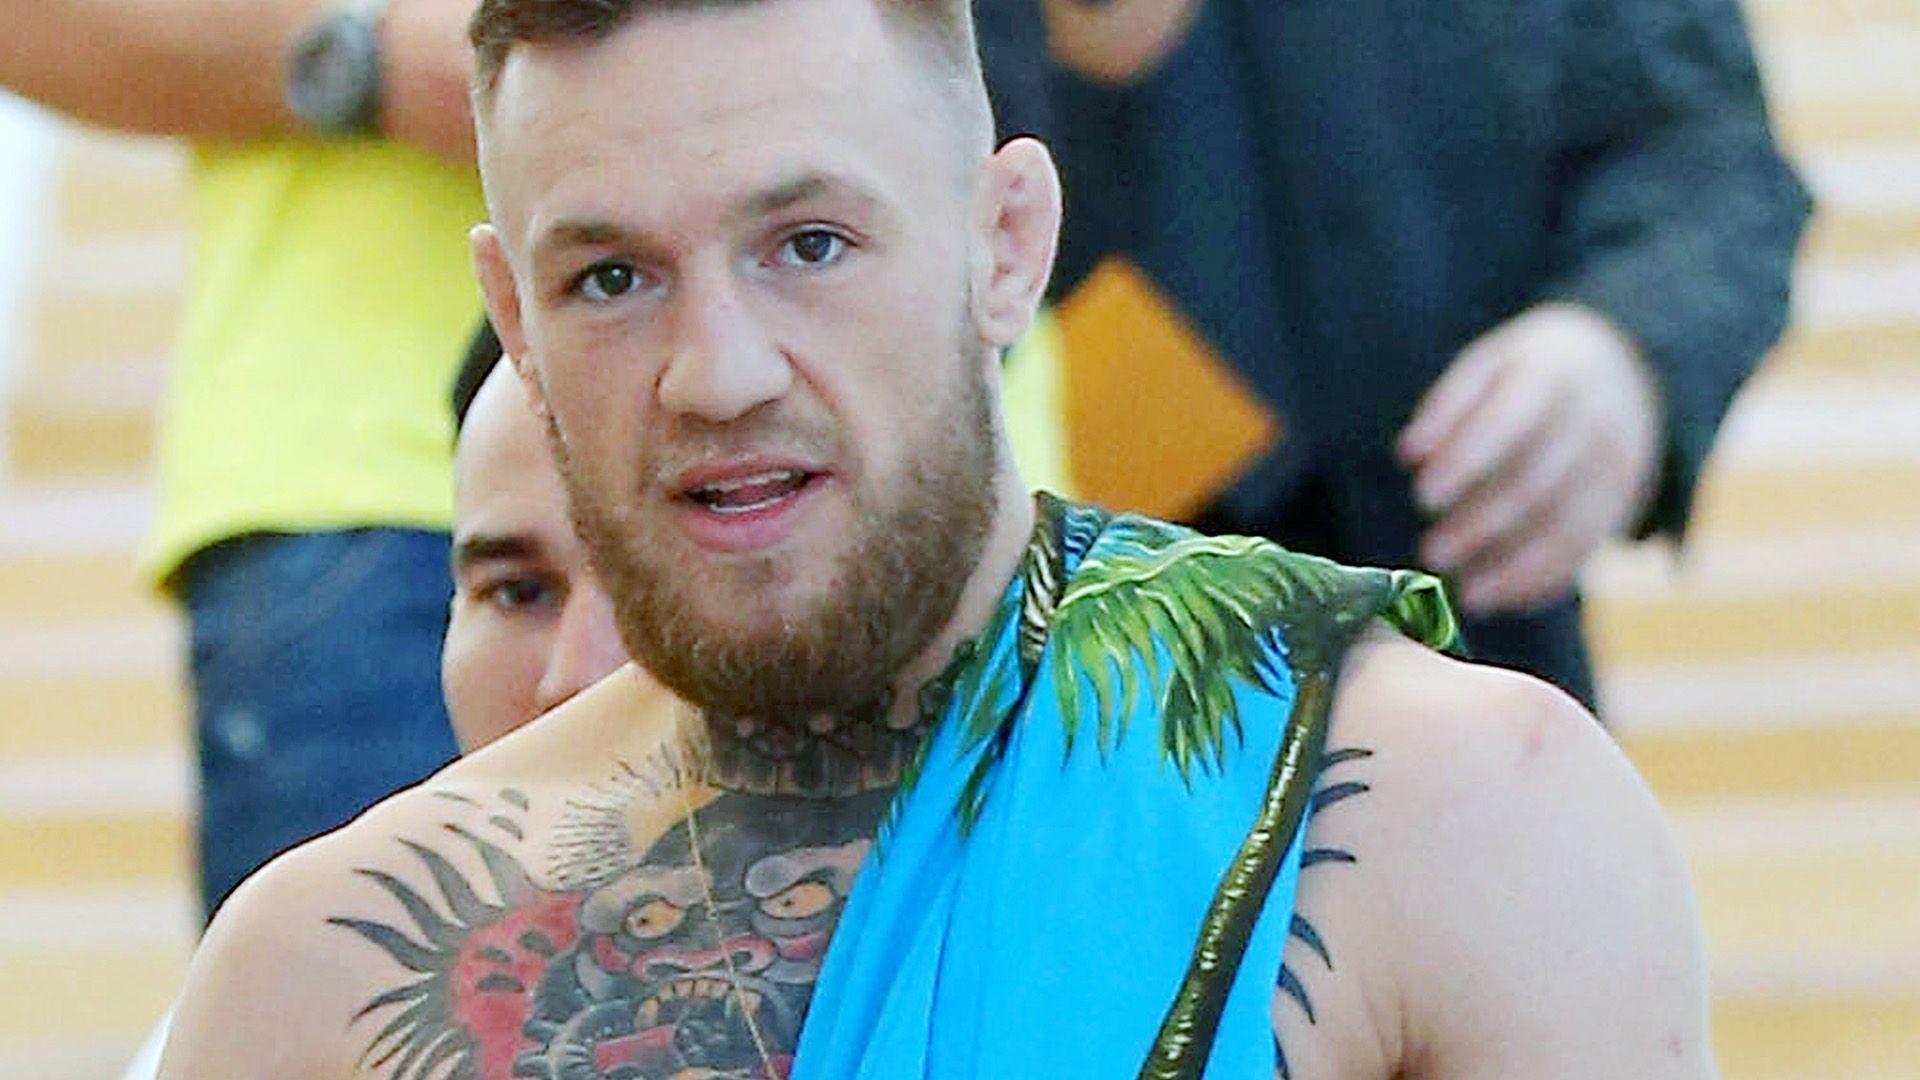 Conor McGregor Best Wallpaper And Photo In Full HD